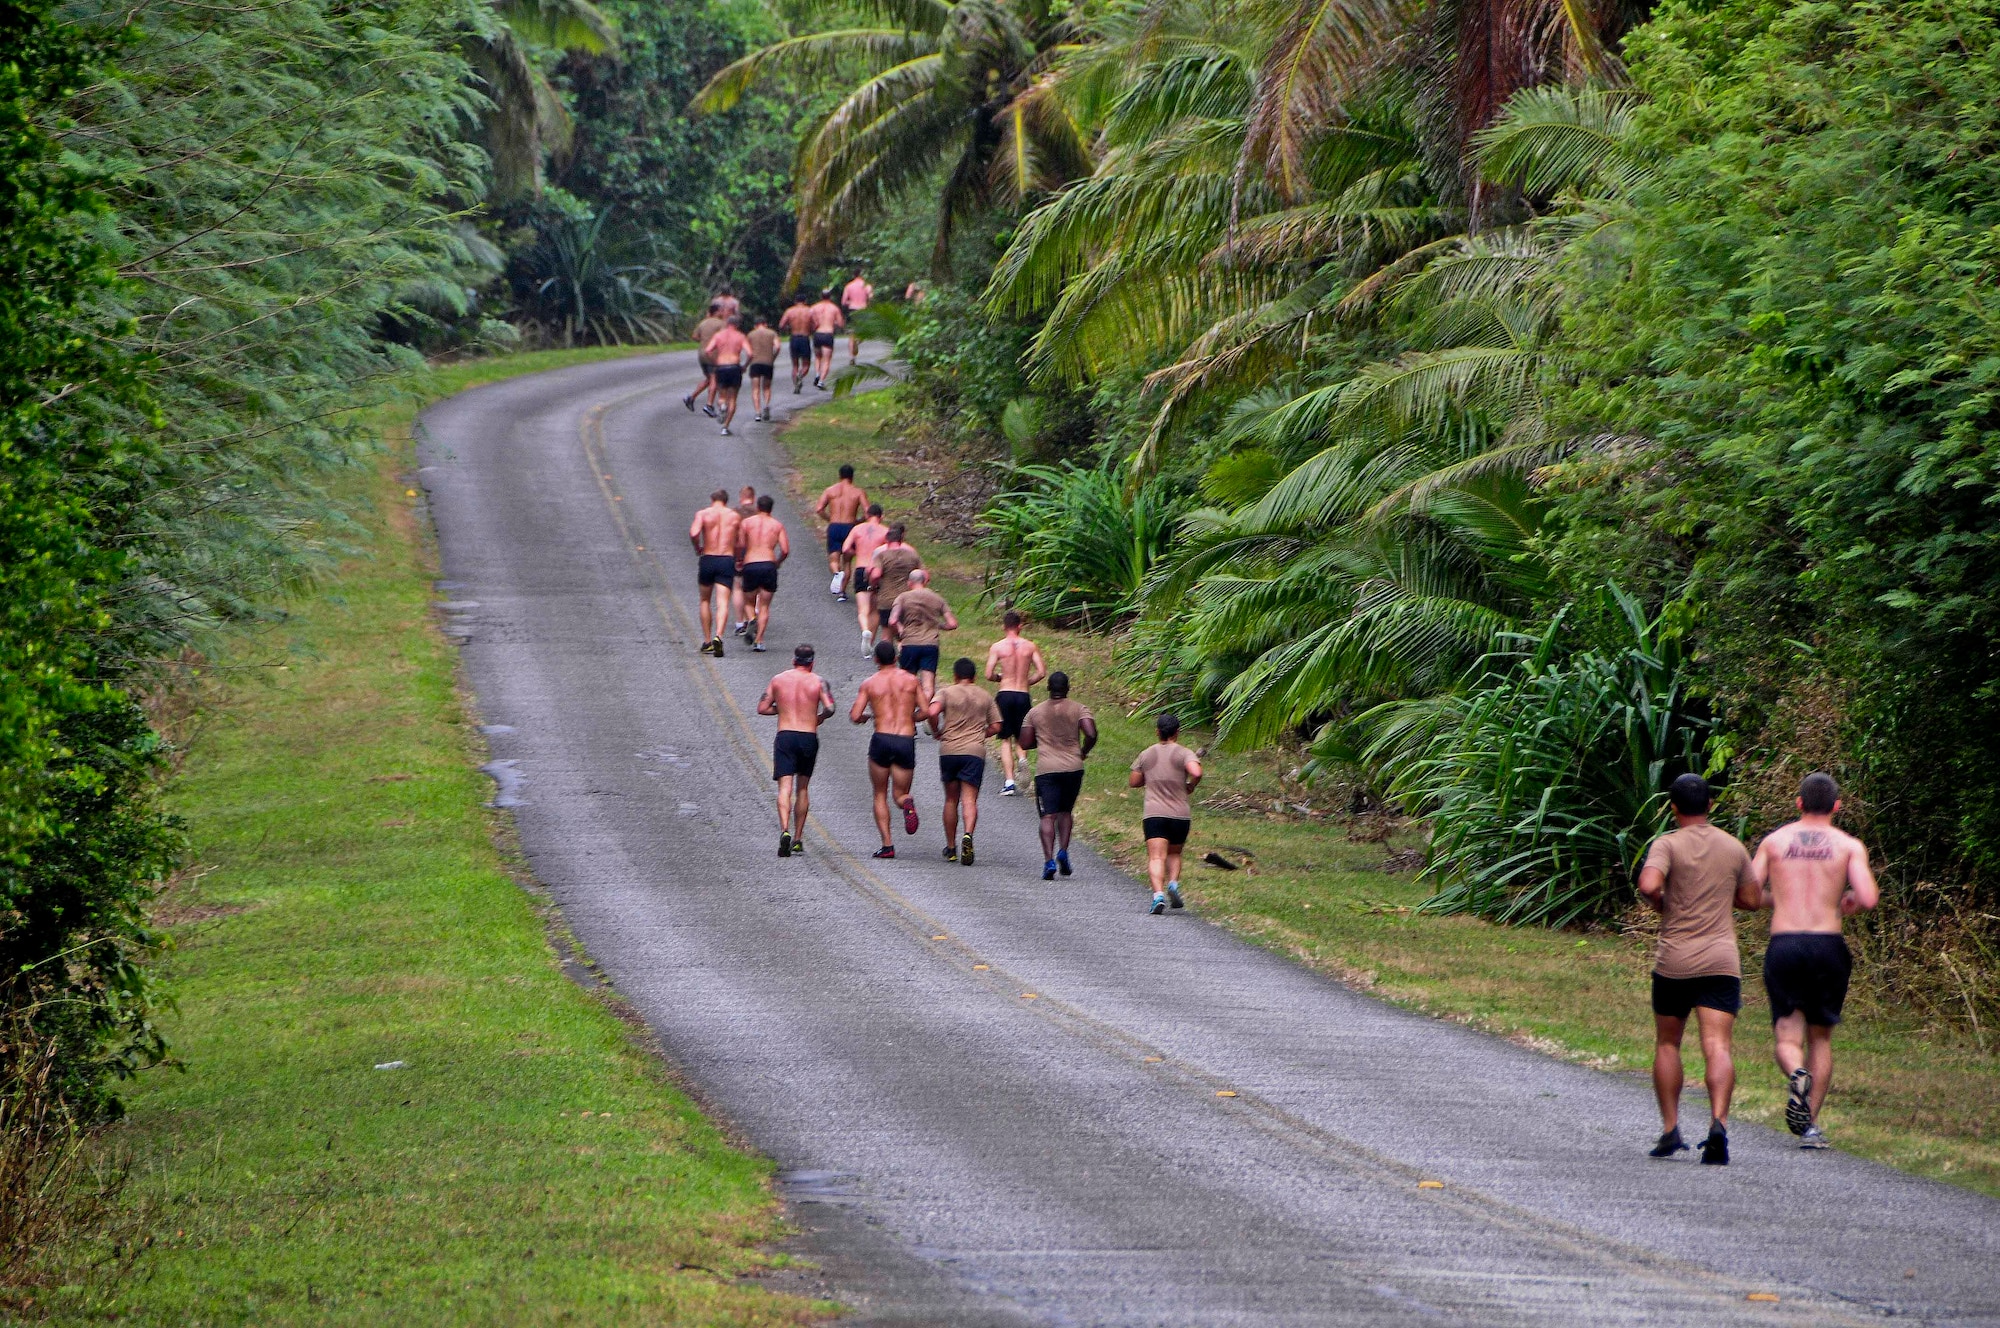 Members from U.S. Navy Explosive Ordnance Disposal Mobile Unit 5 run Sanders Slope at Andersen Air Force Base, Guam, Feb. 15, 2013. The EODMU5 members and their families took on the challenge of Sanders Slope, from Tarague Beach to the top of the hill and back, as part of their family and morale day. (U.S. Air Force photo by Airman 1st Class Marianique Santos/Released)